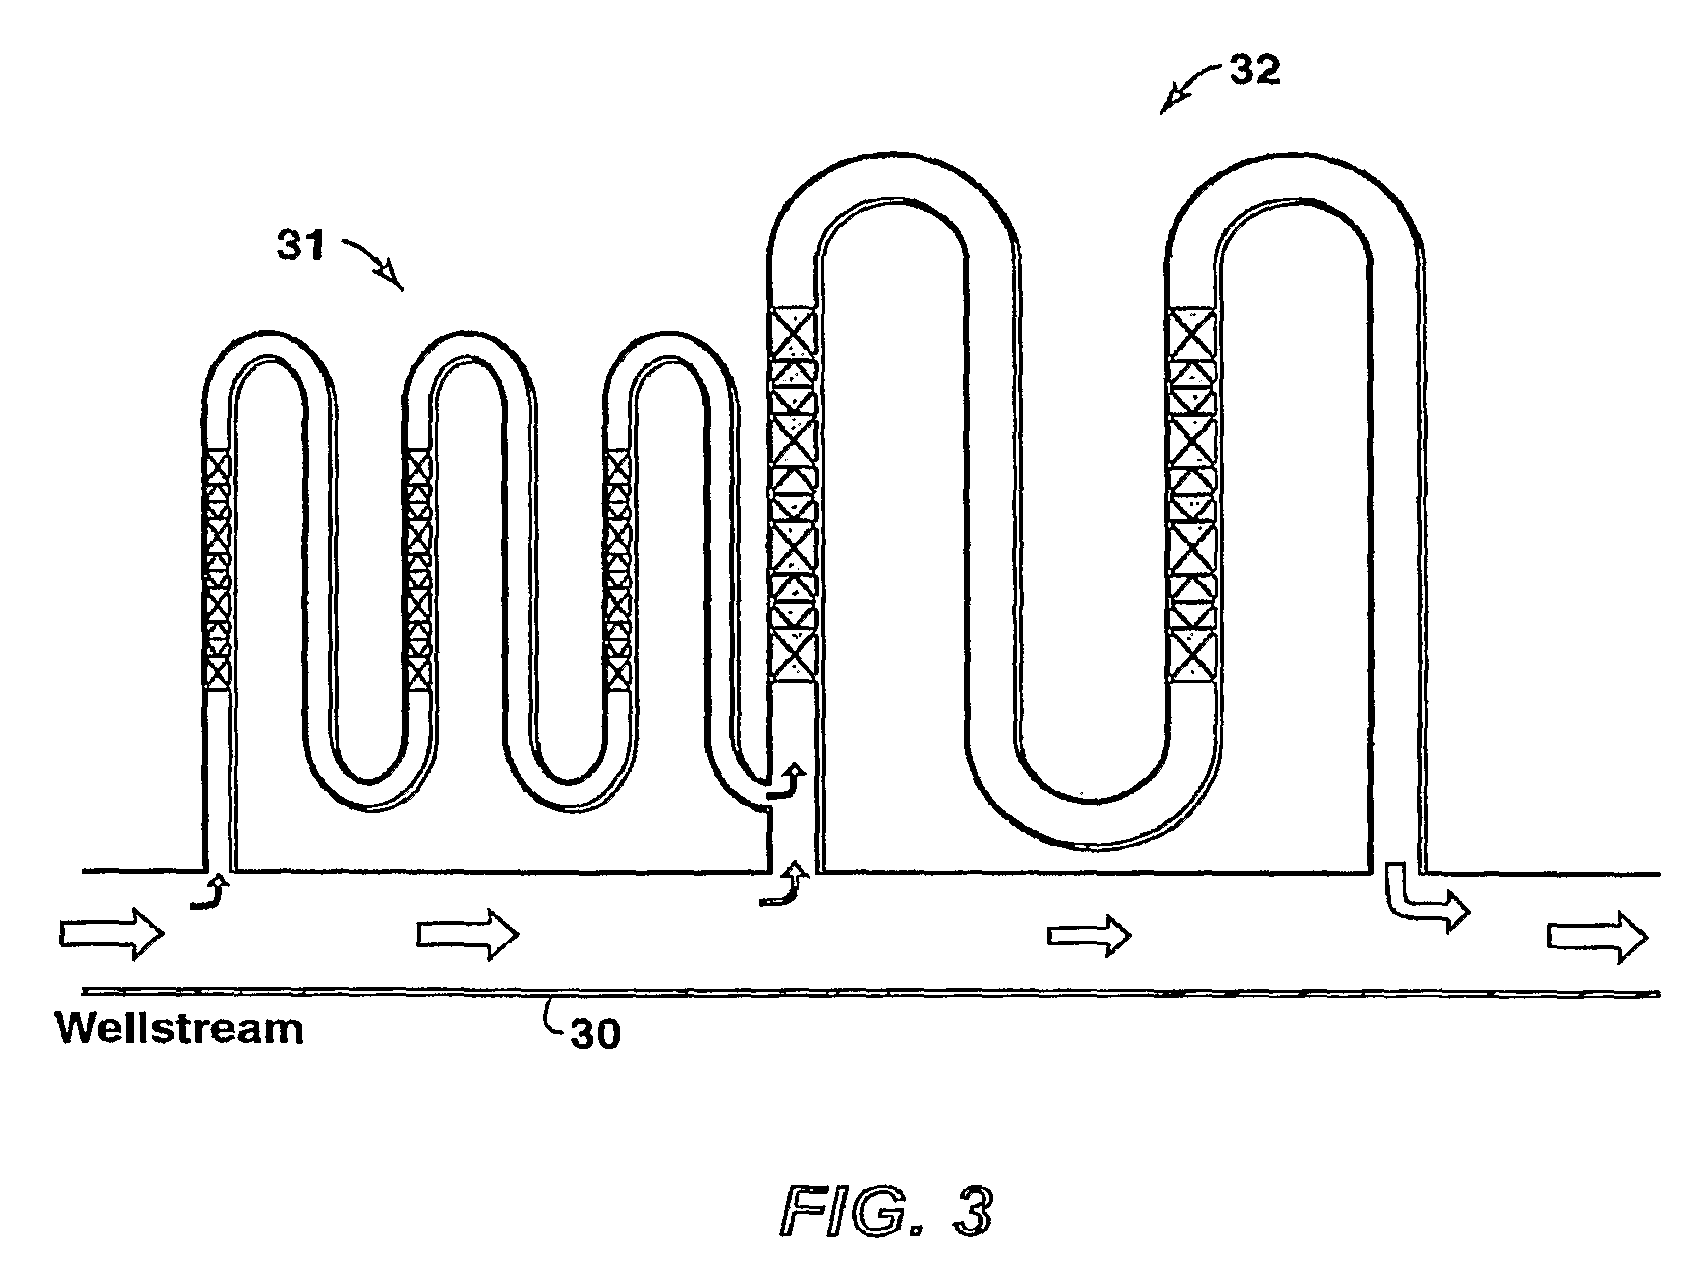 Method of Generating a Non-Plugging Hydrate Slurry